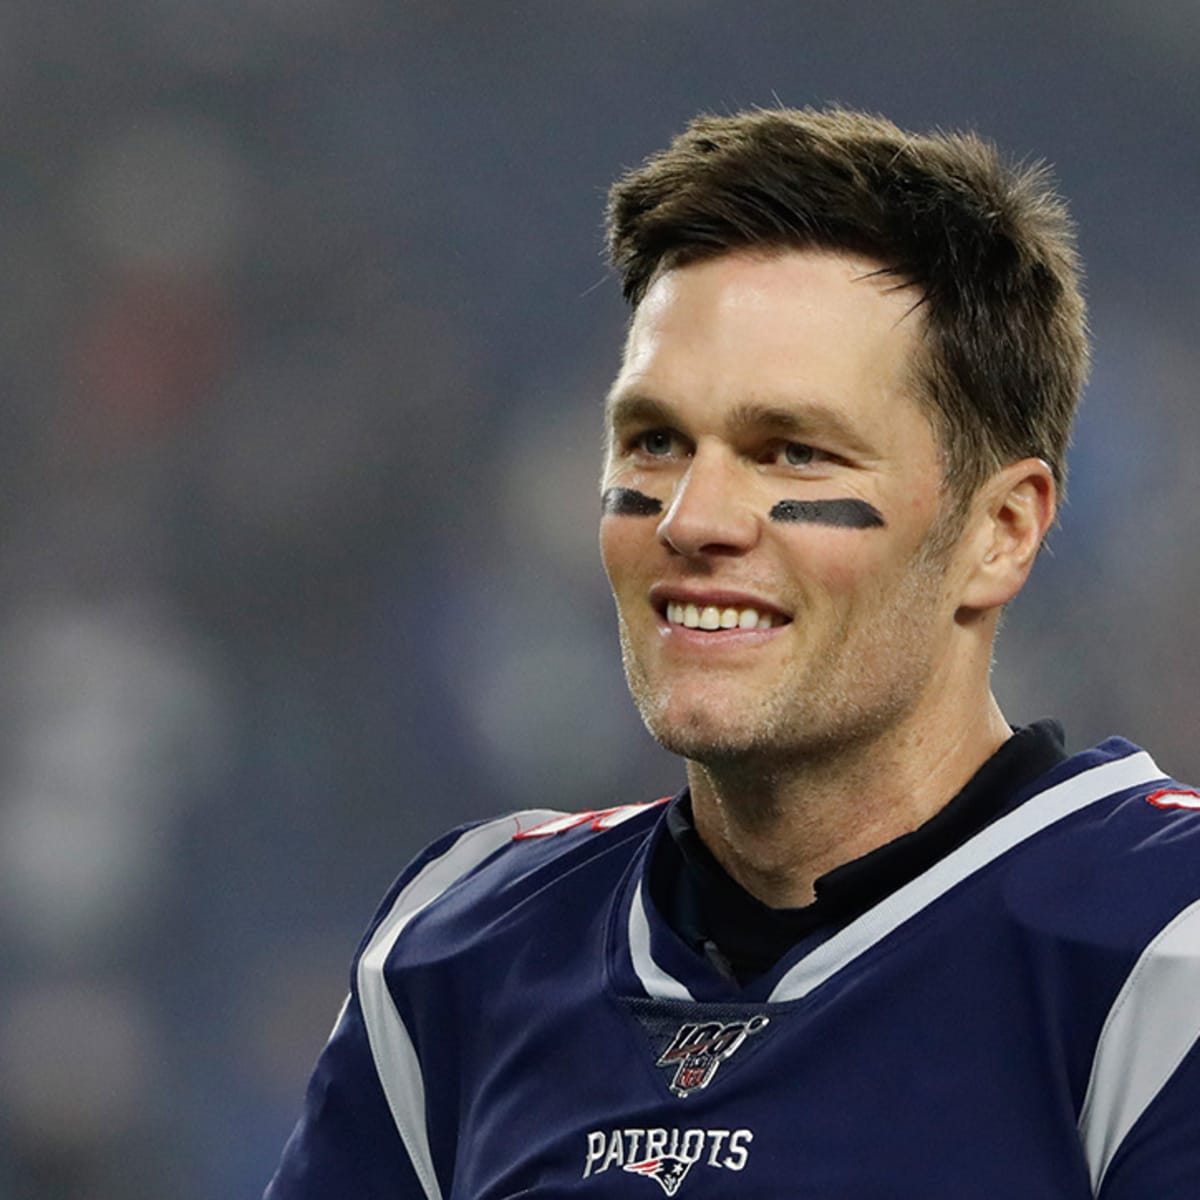 Tom Brady launching 199 Productions company to develop movies and